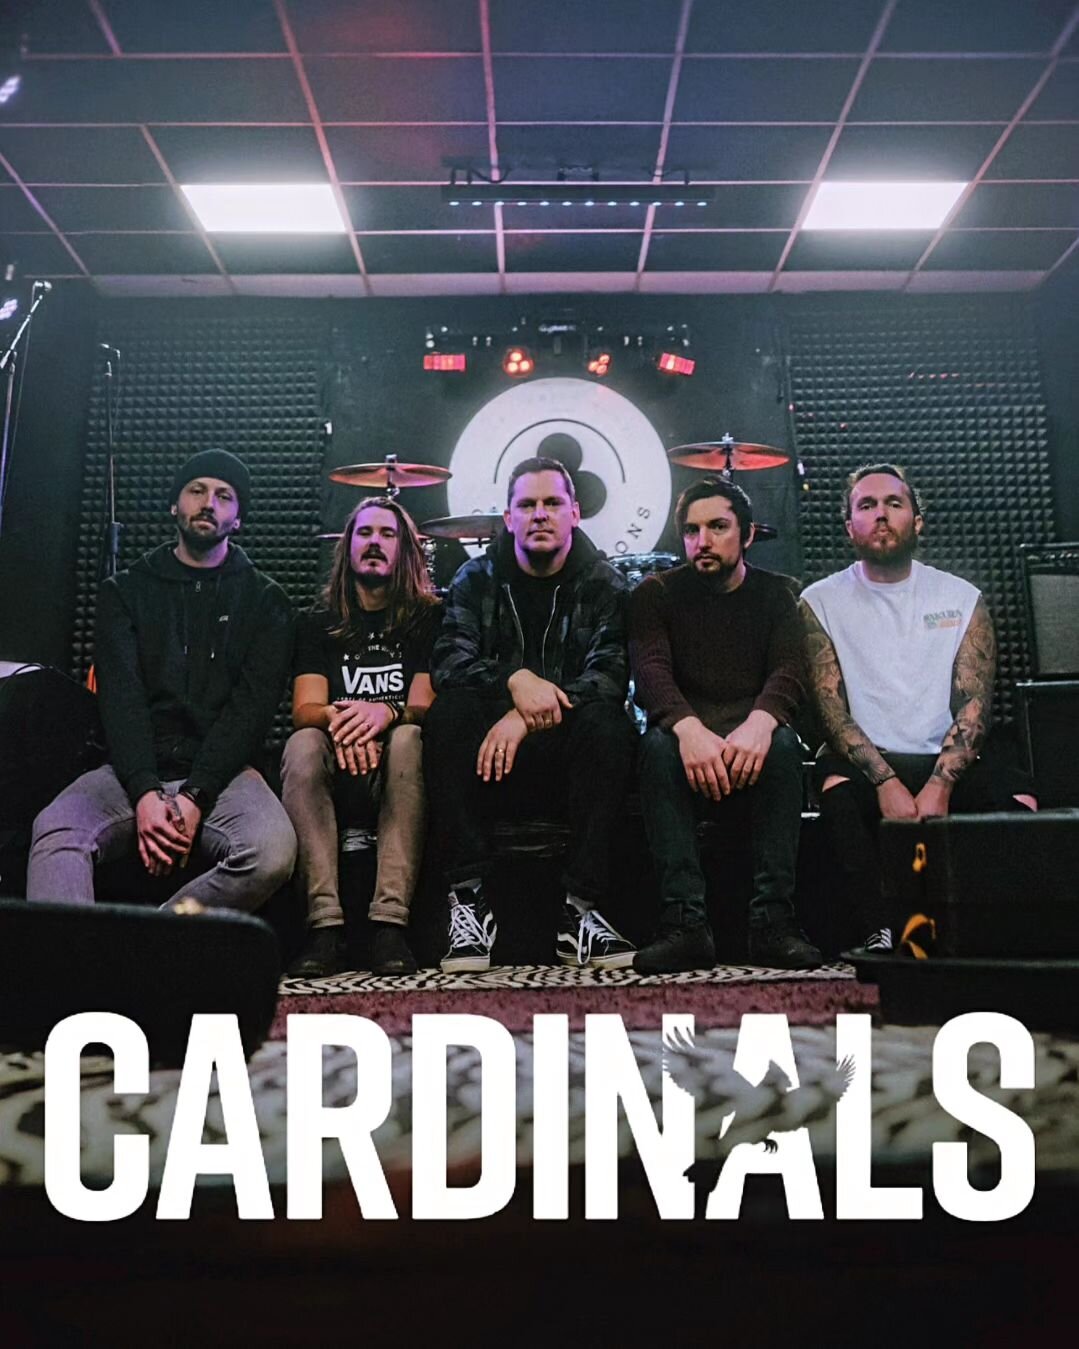 @cardinals_uk Ep will be out tomorrow! Go to the link in their bio to find out more!